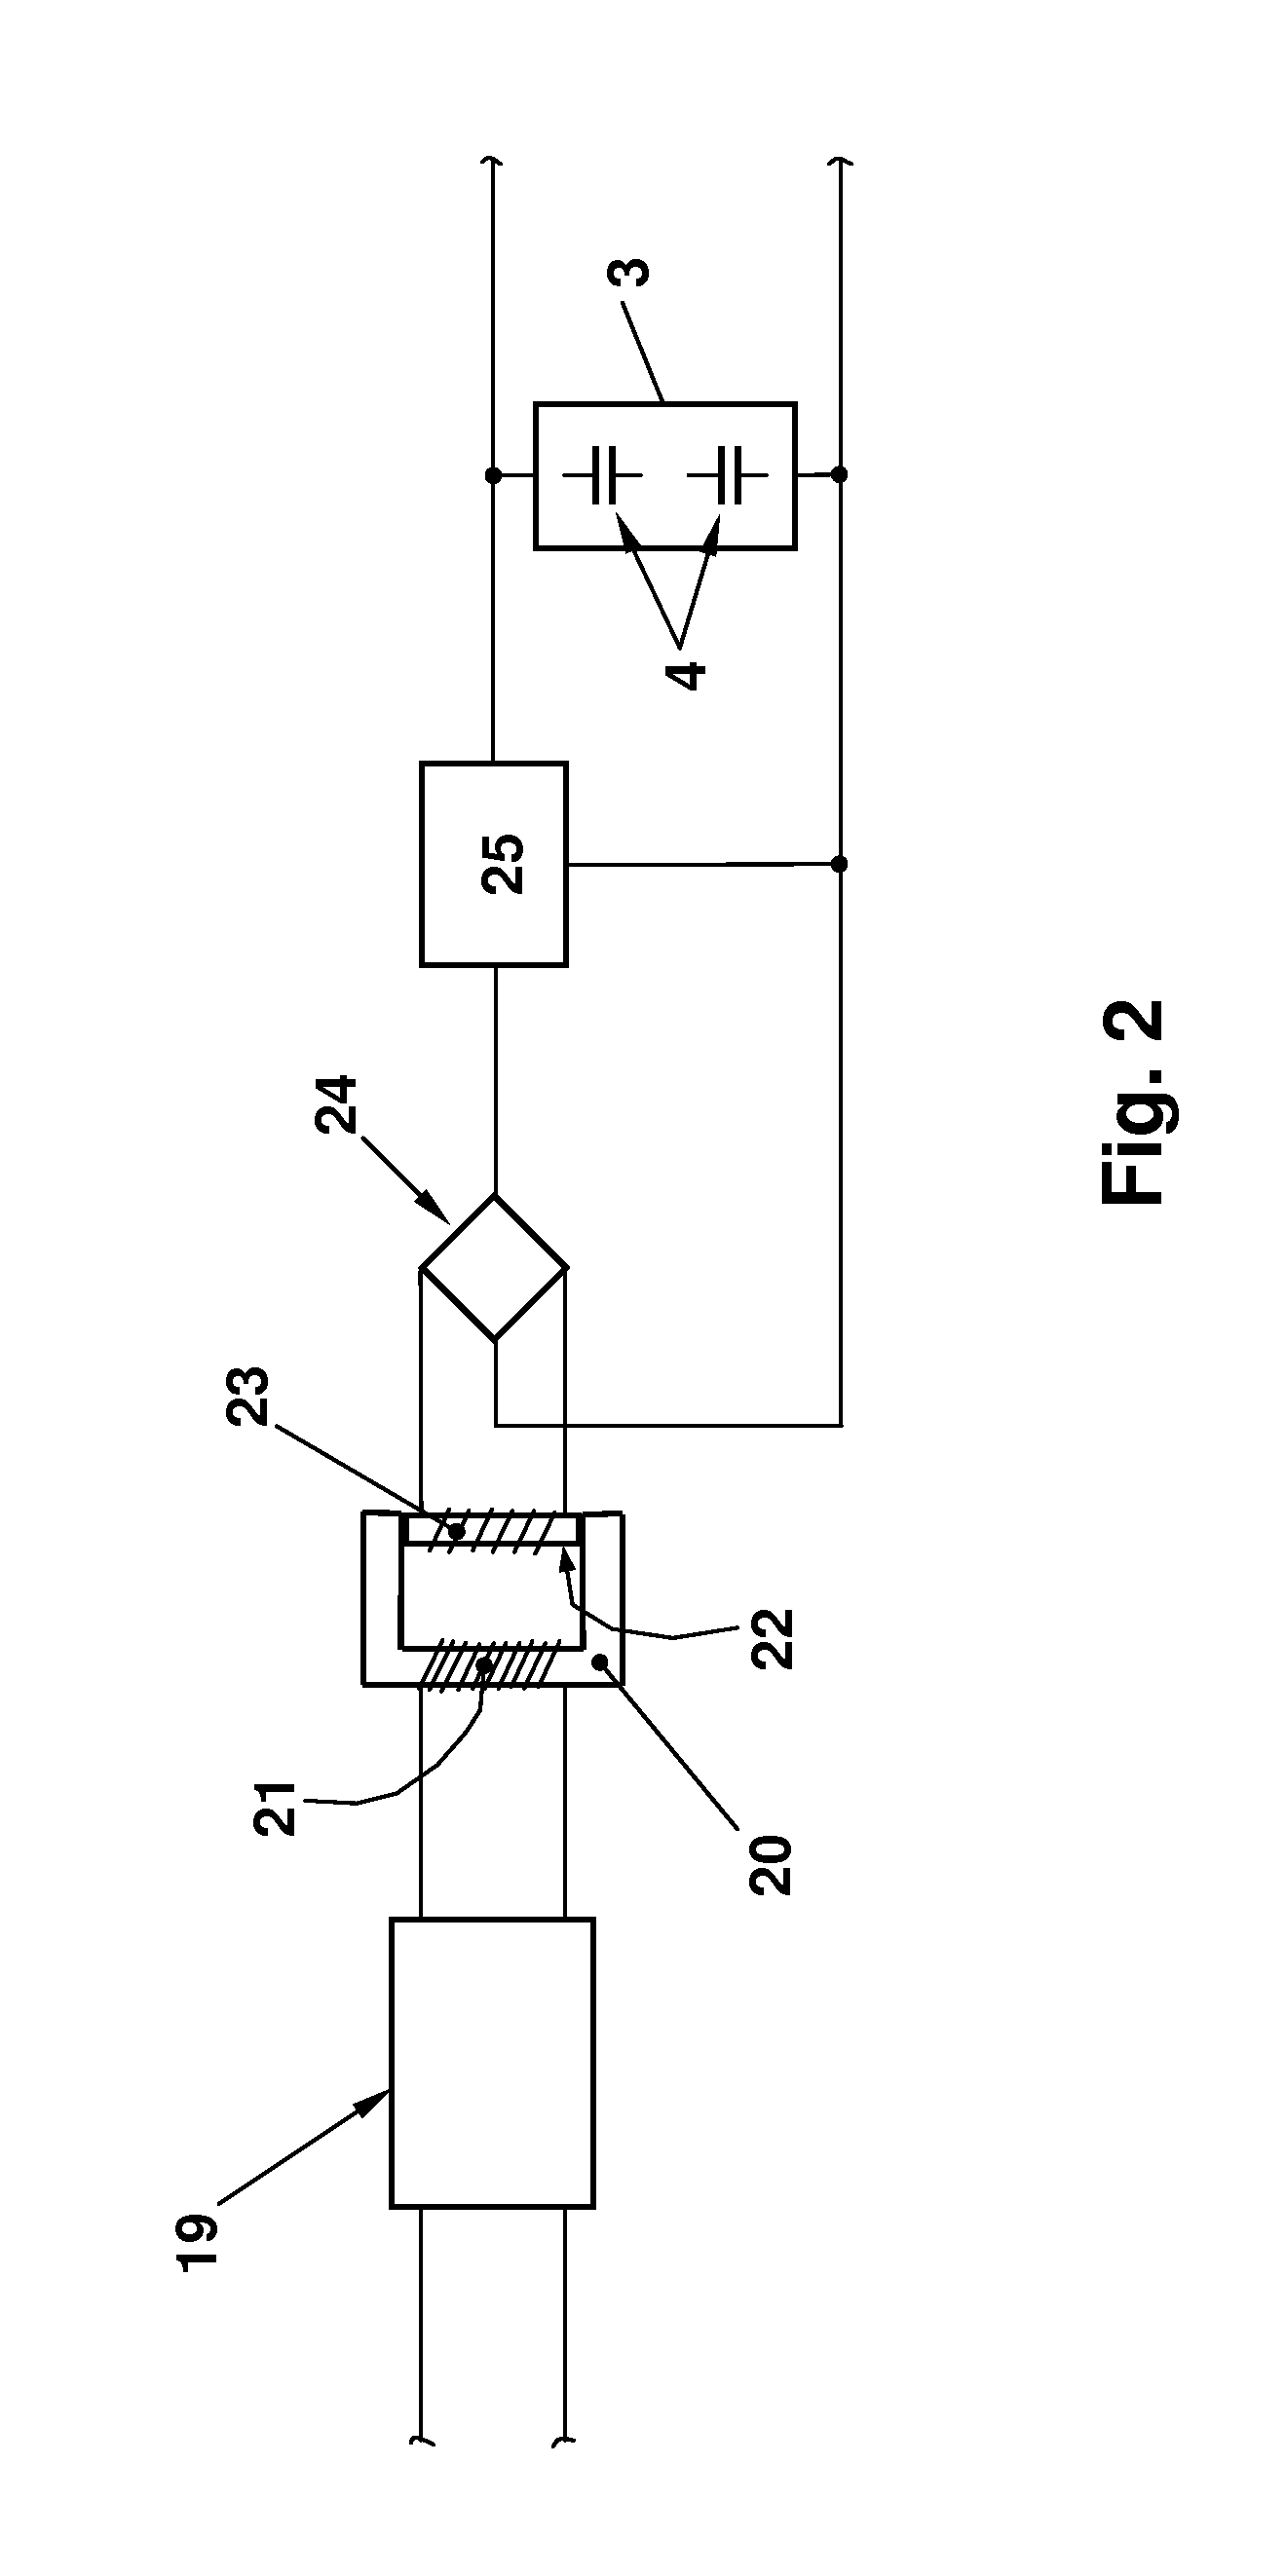 Power supply equipment for fuel dispensing nozzle